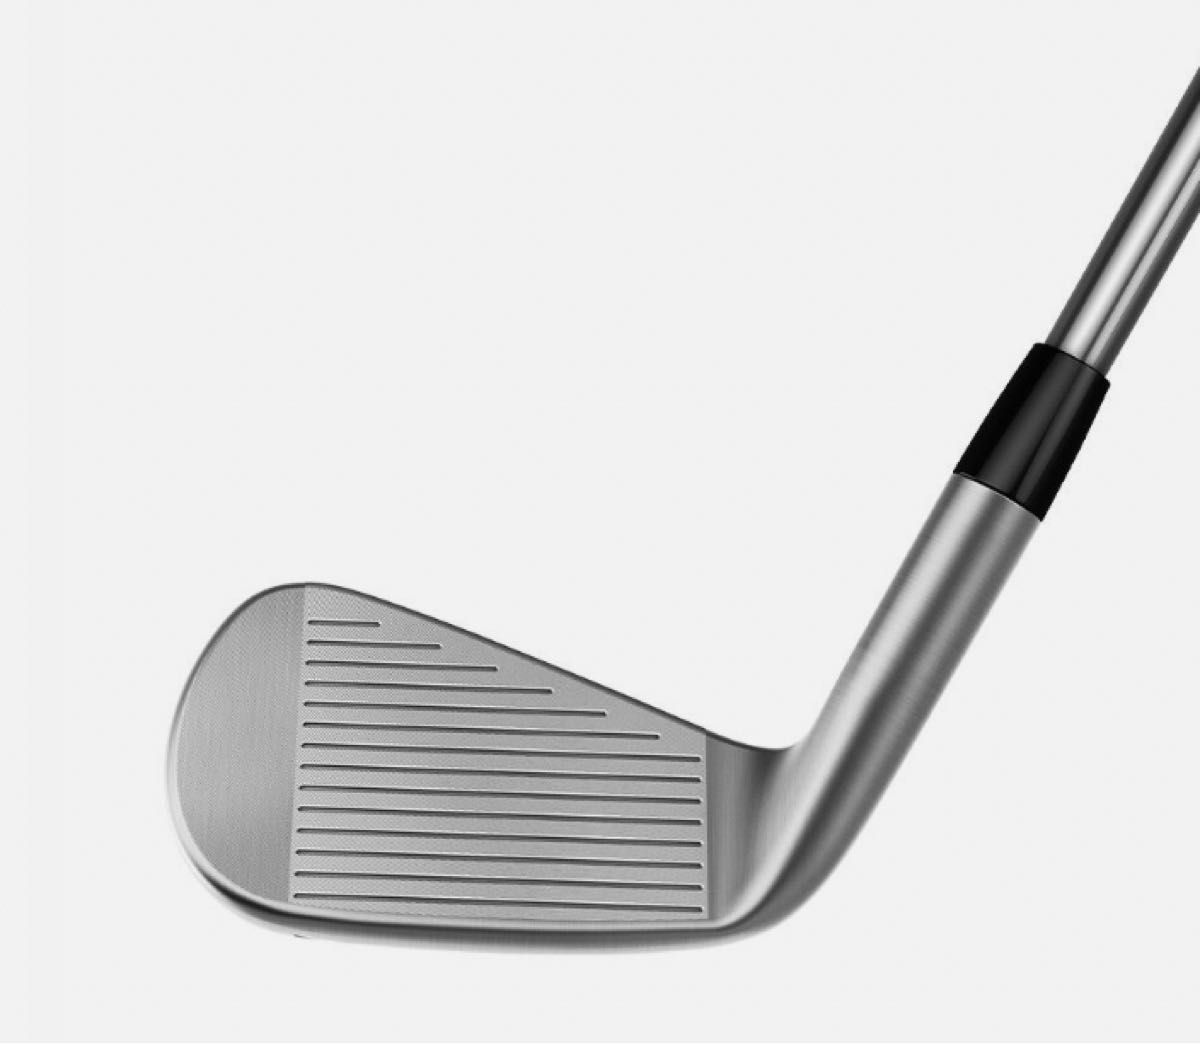 TaylorMade NEW P7MC 2023 アイアンセット 5-P 6本セット Dynamic Gold